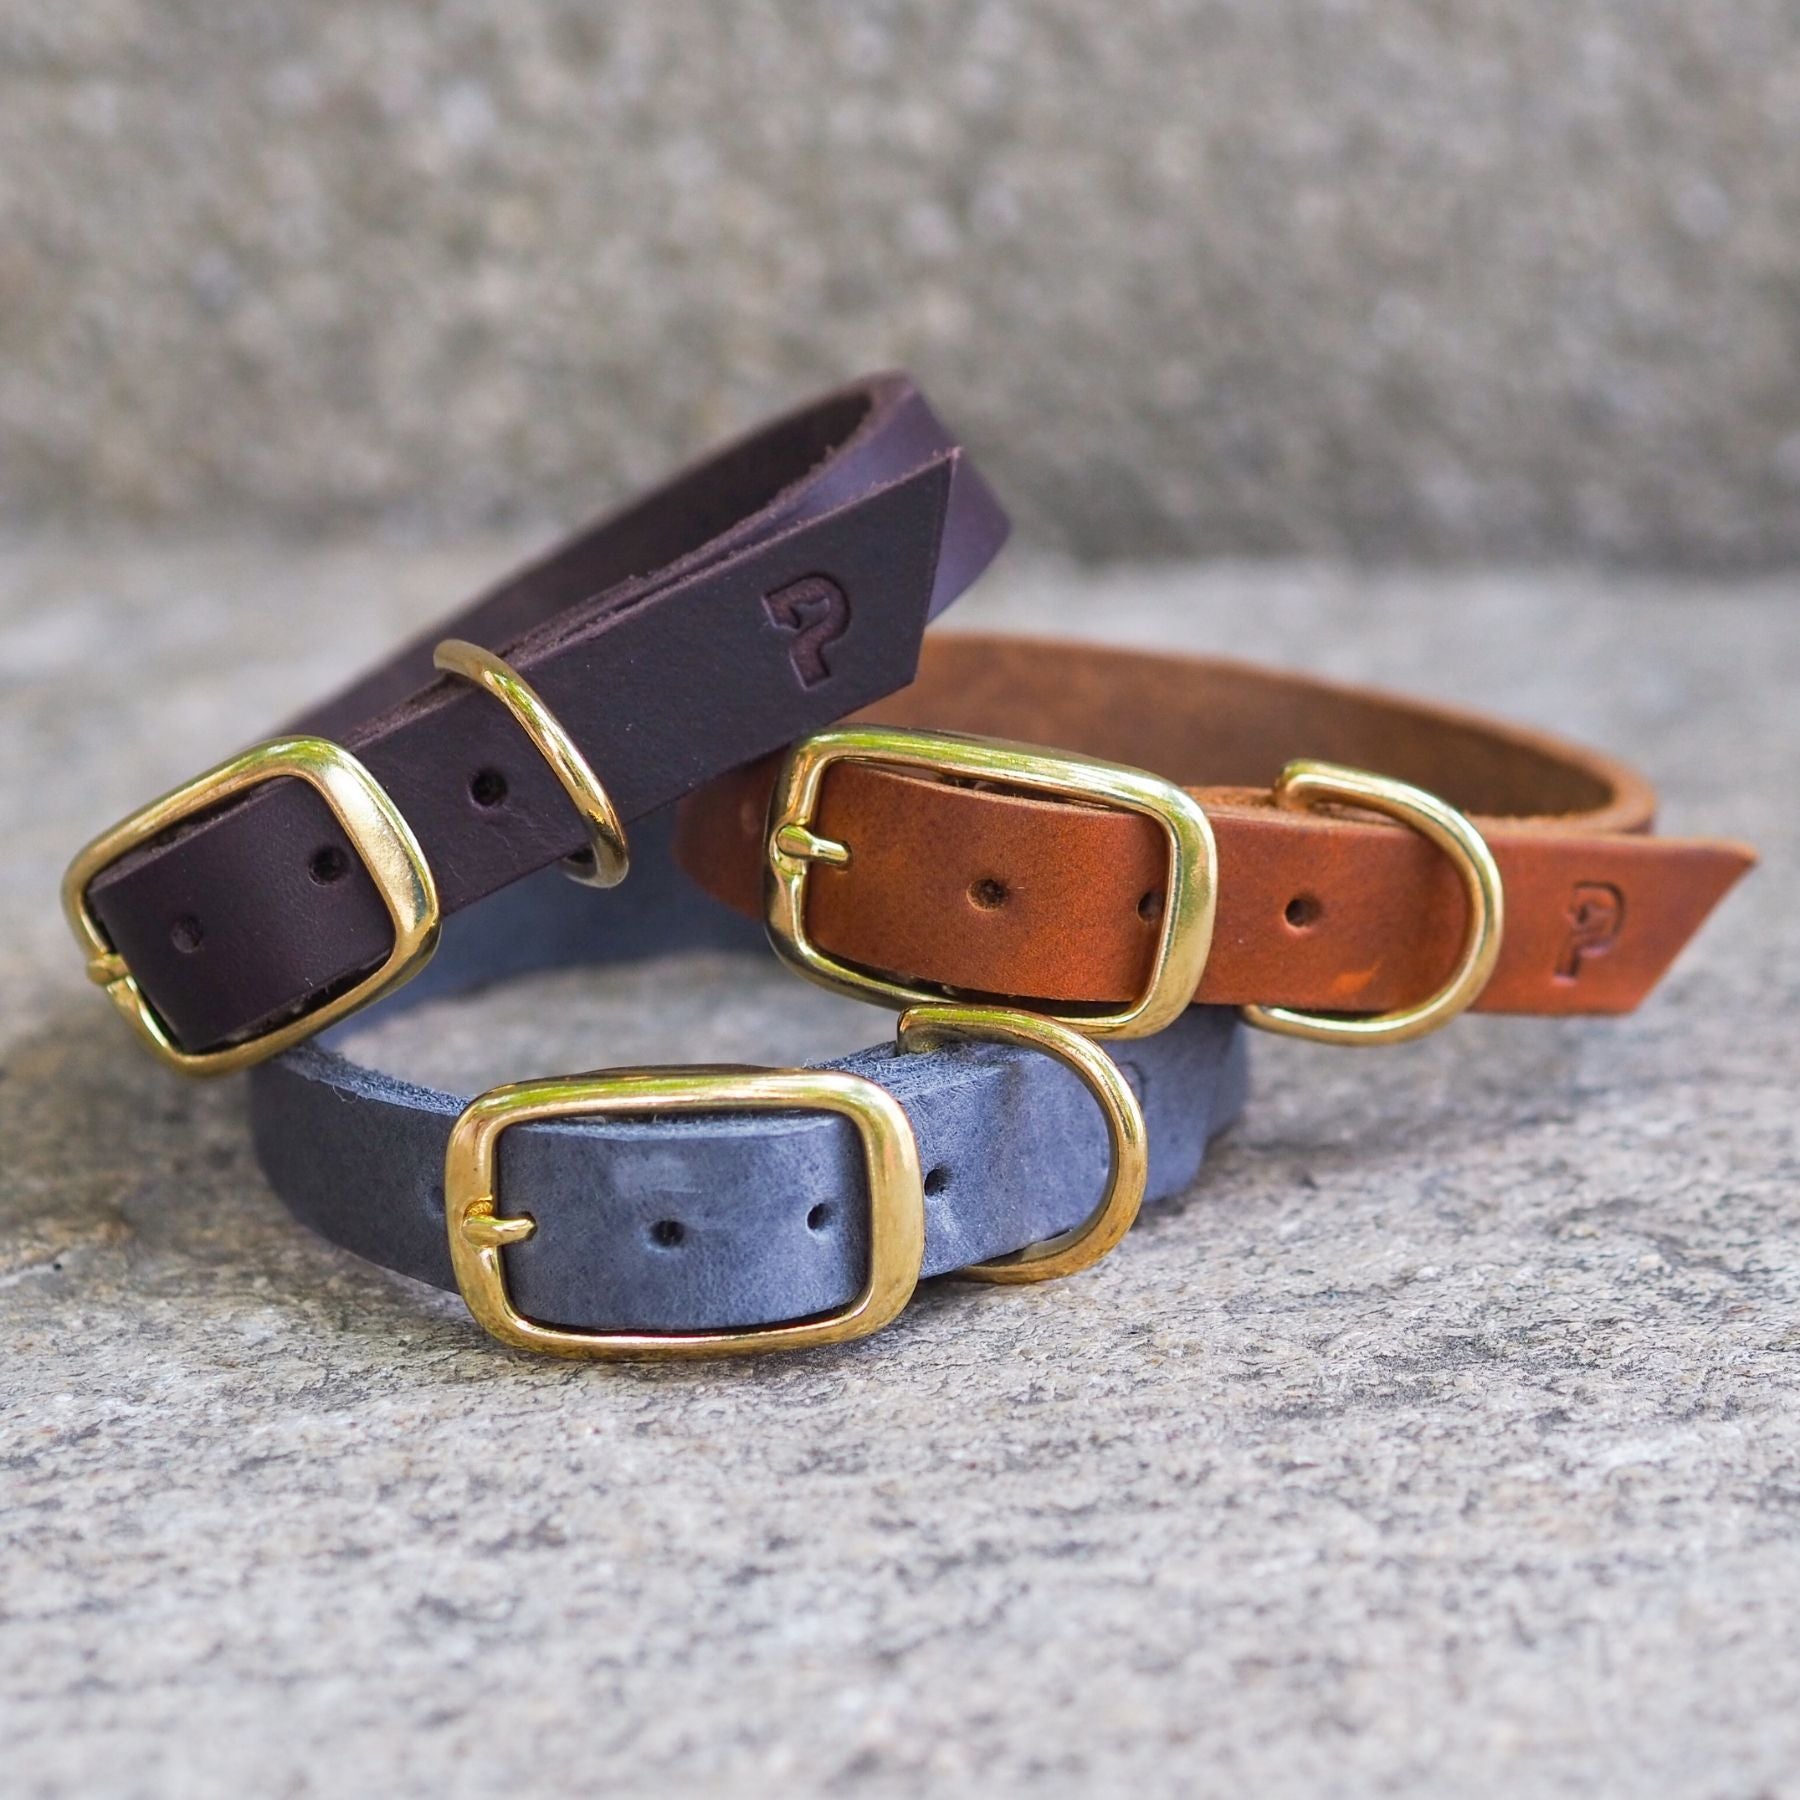 Narrow leather collar in chestnut